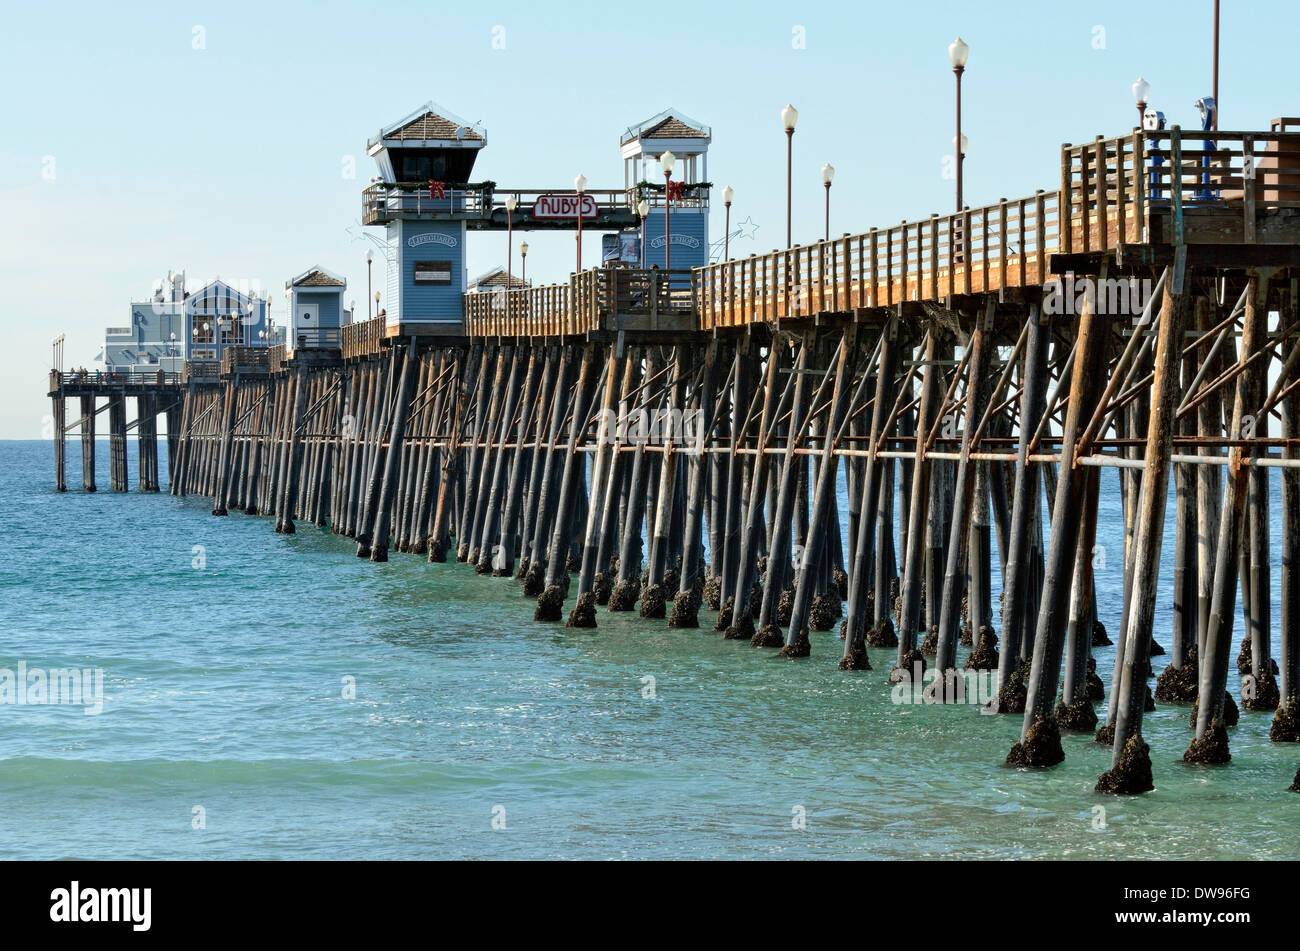 Historic Oceanside Pier, Oceanside, San Diego County, California, United States Stock Photo